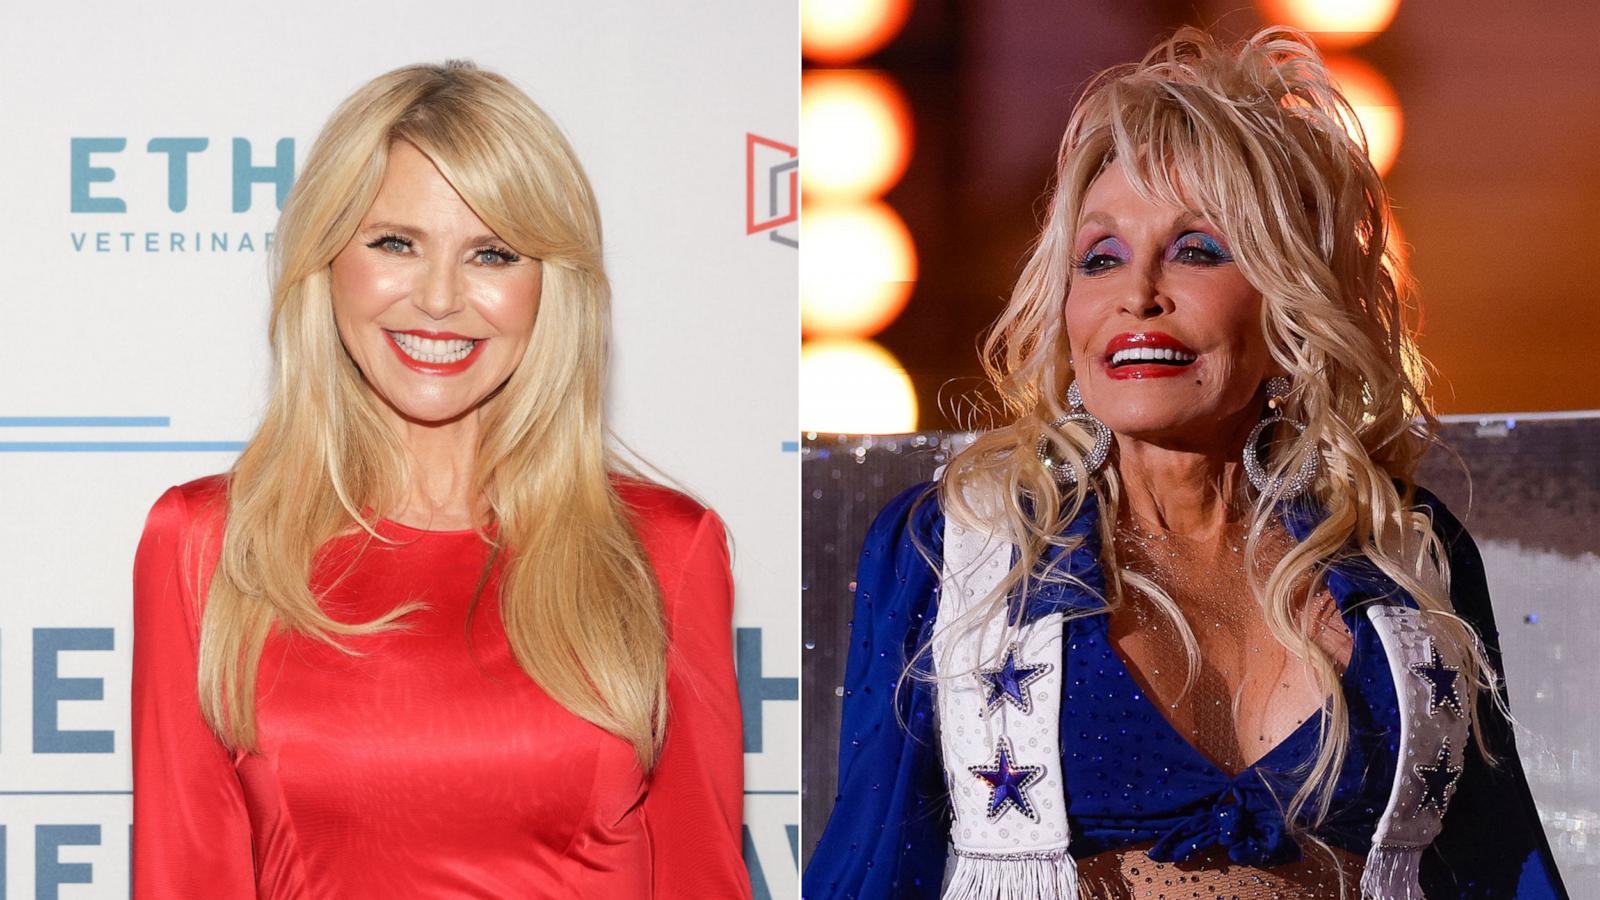 Christie Brinkley calls out those saying Dolly Parton should